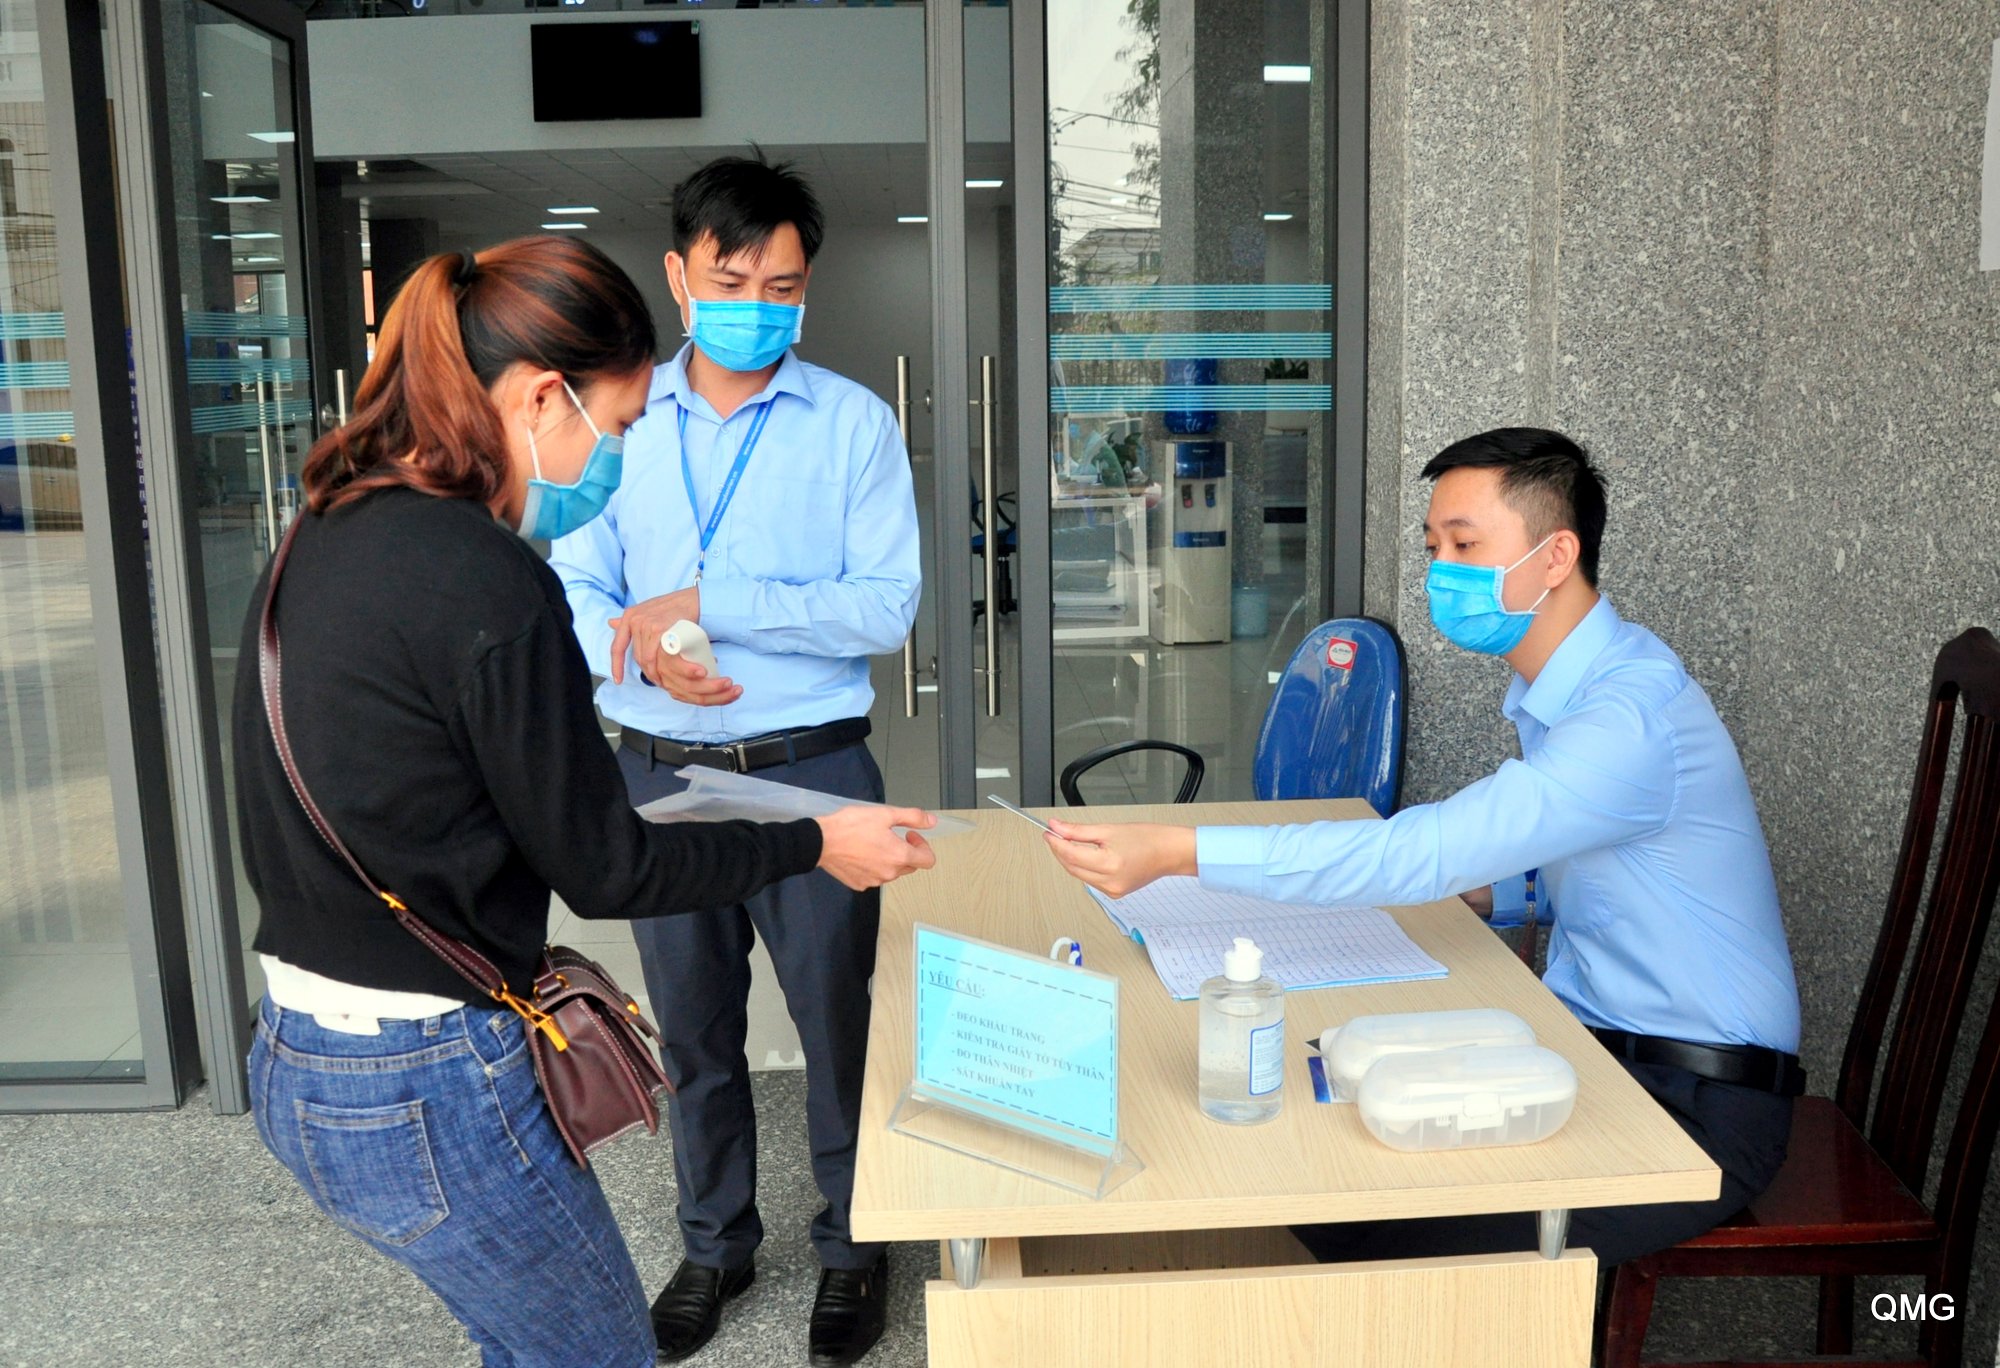 Quang Ninh Public Service Administration Center took notes visitors’ information for closer heath supervision. 